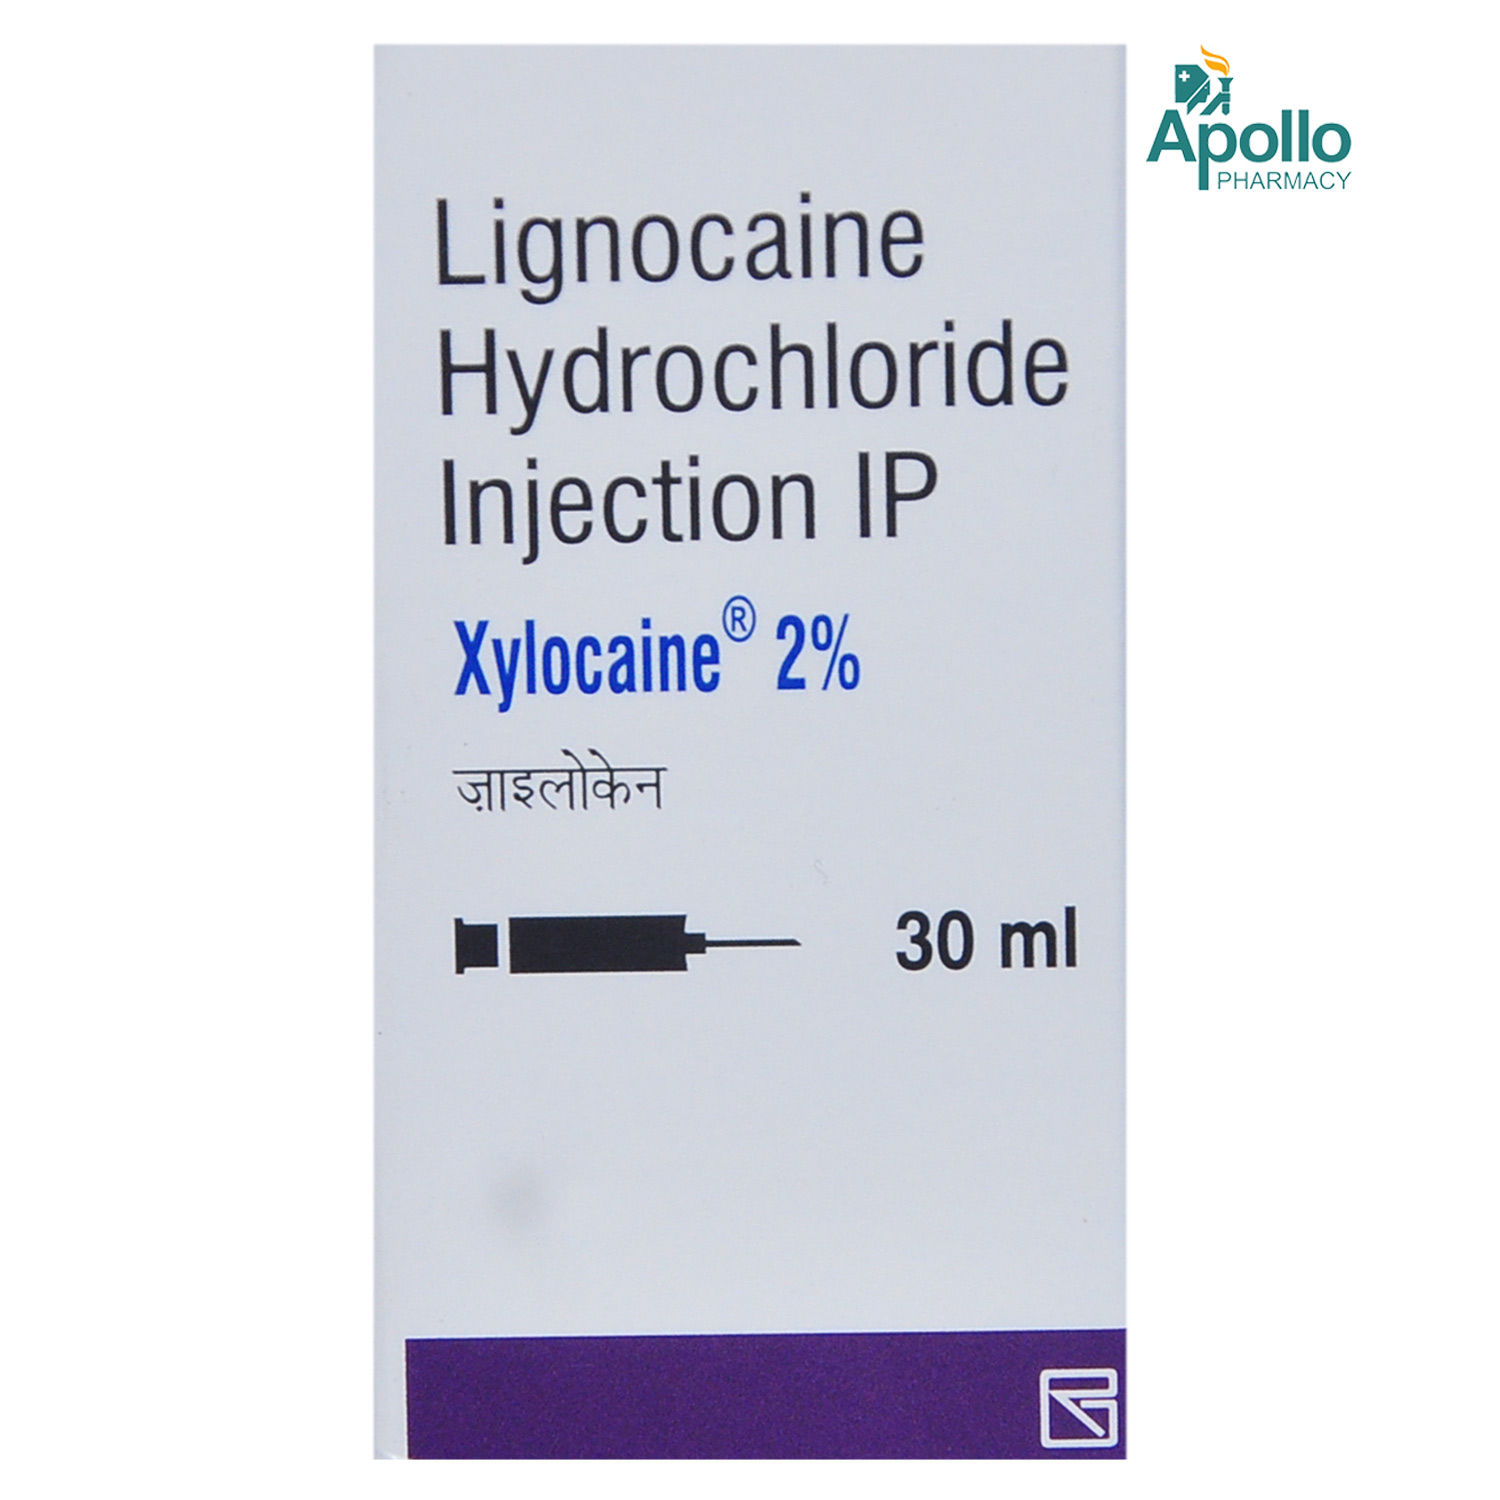 XYLOCAINE 2% IM INJECTION 30ML, Pack of 1 INJECTION